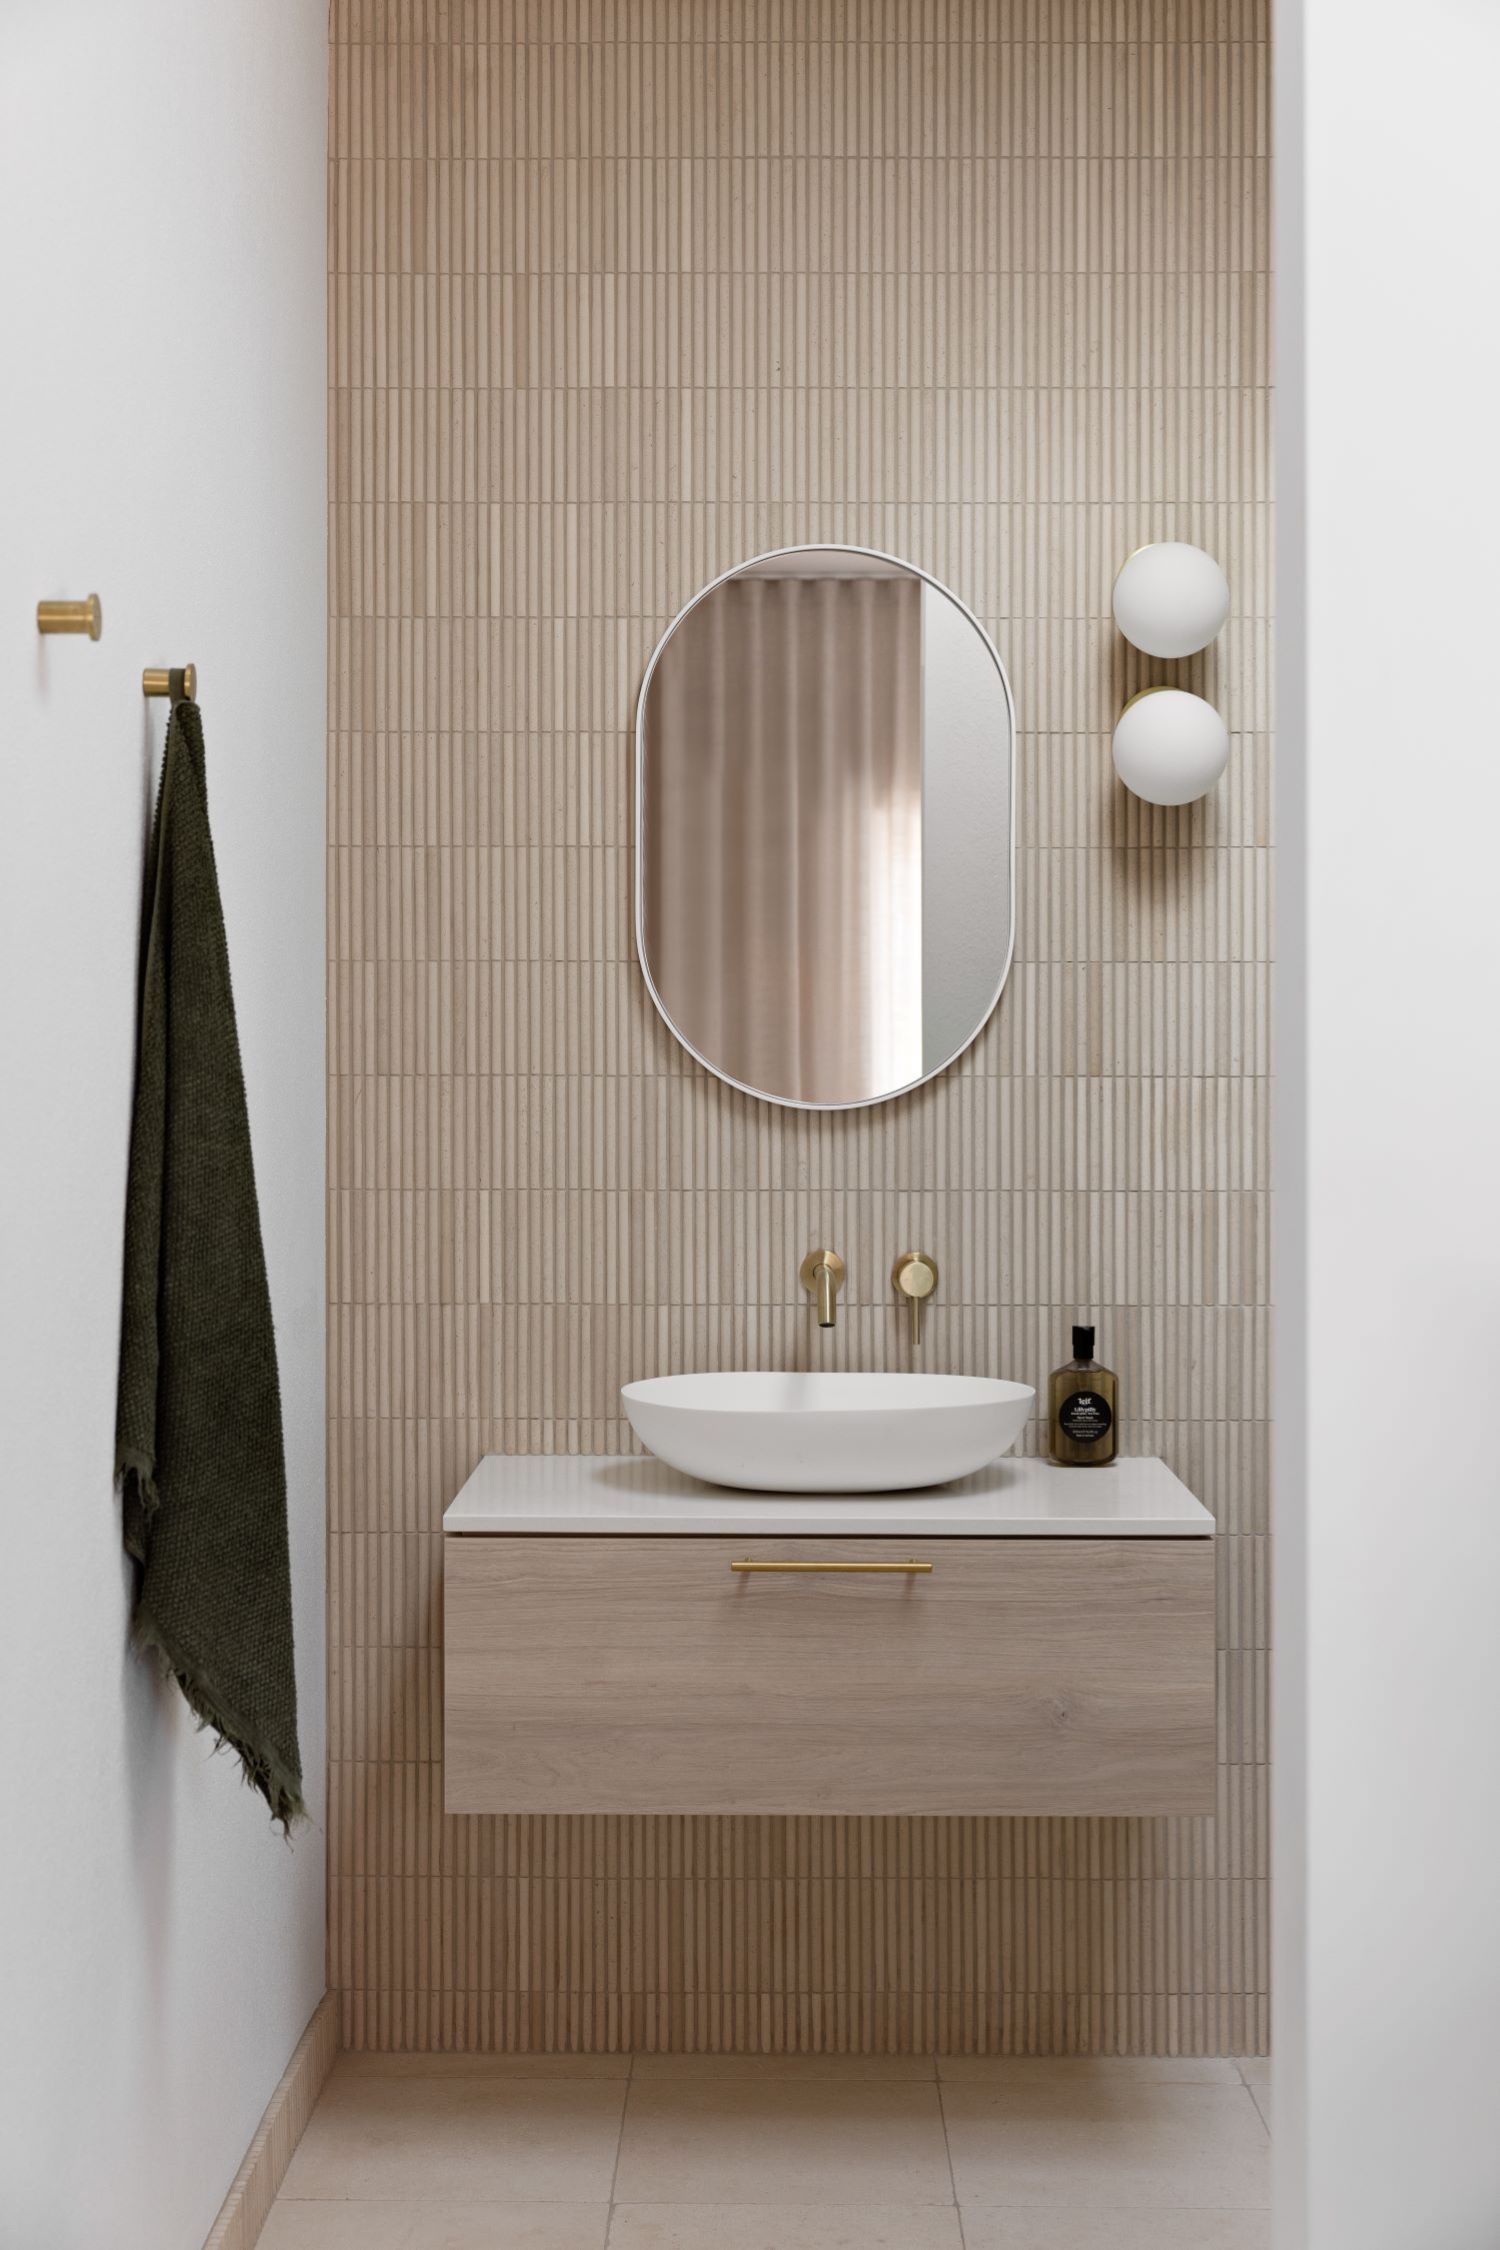 Illuminate Your Space: The Best Bathroom Wall Lights for Every Style